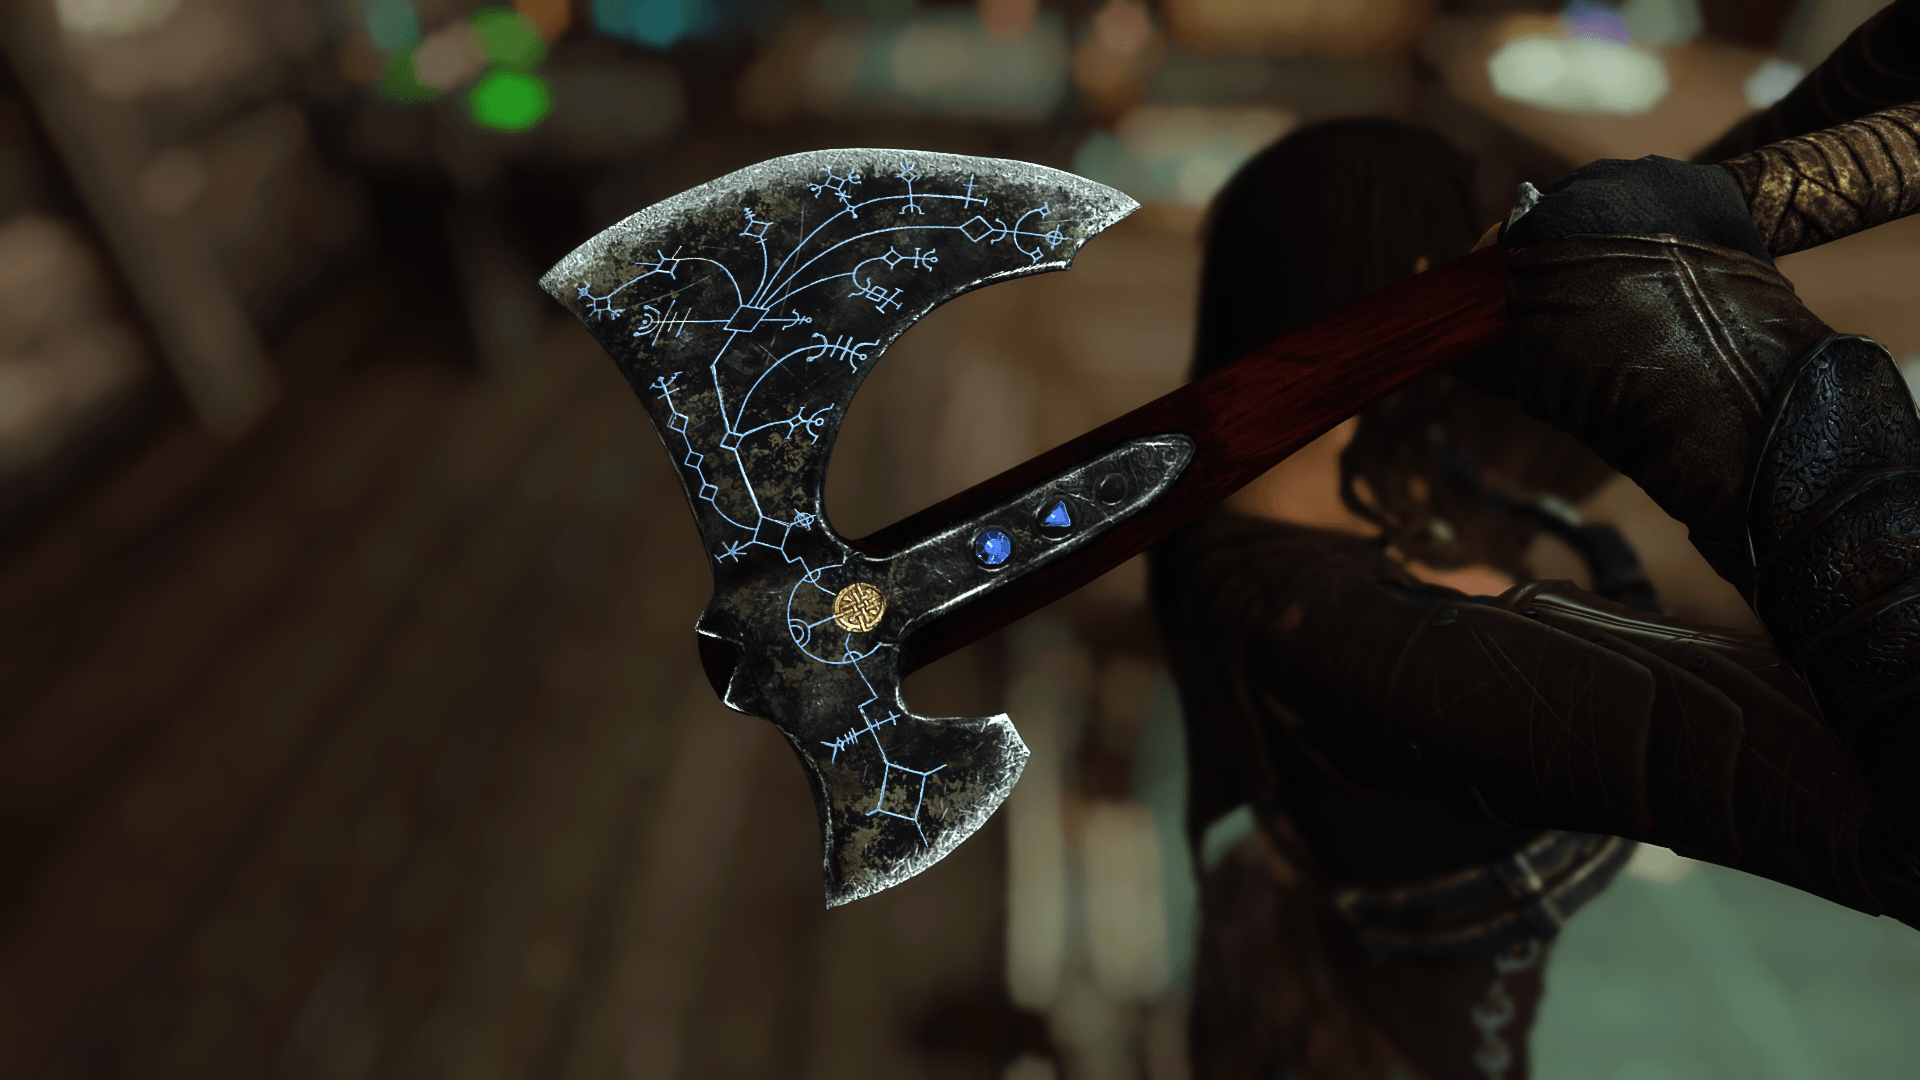 Skyrim Mod adds God of War Leviathan Axe and it is Beautiful